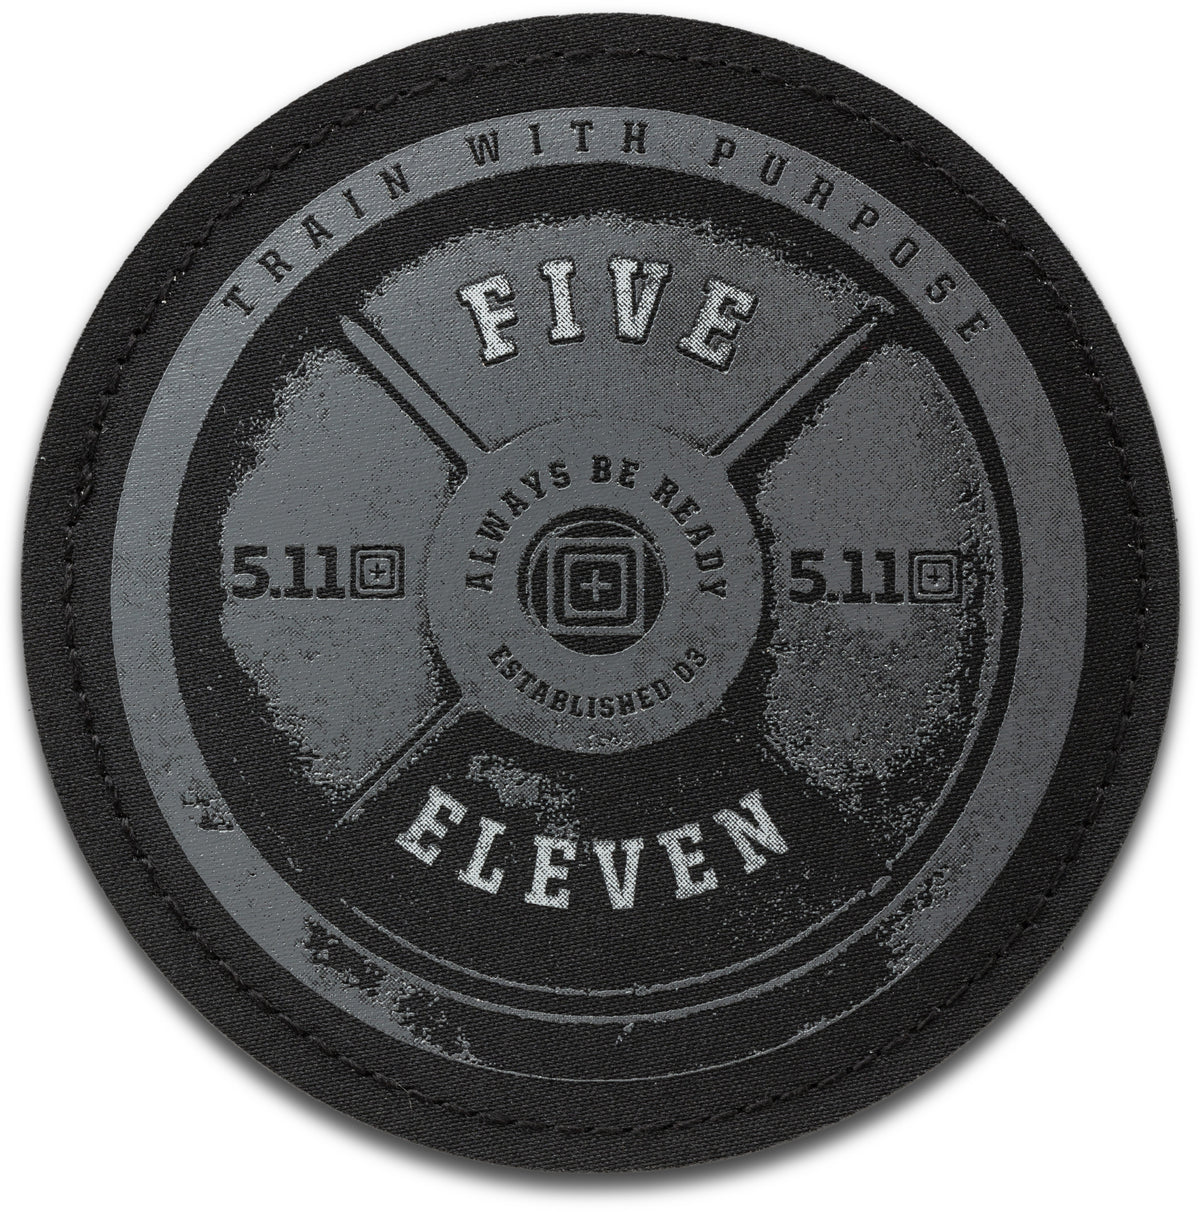 5.11 Tactical PT-R Weight Plate Patch